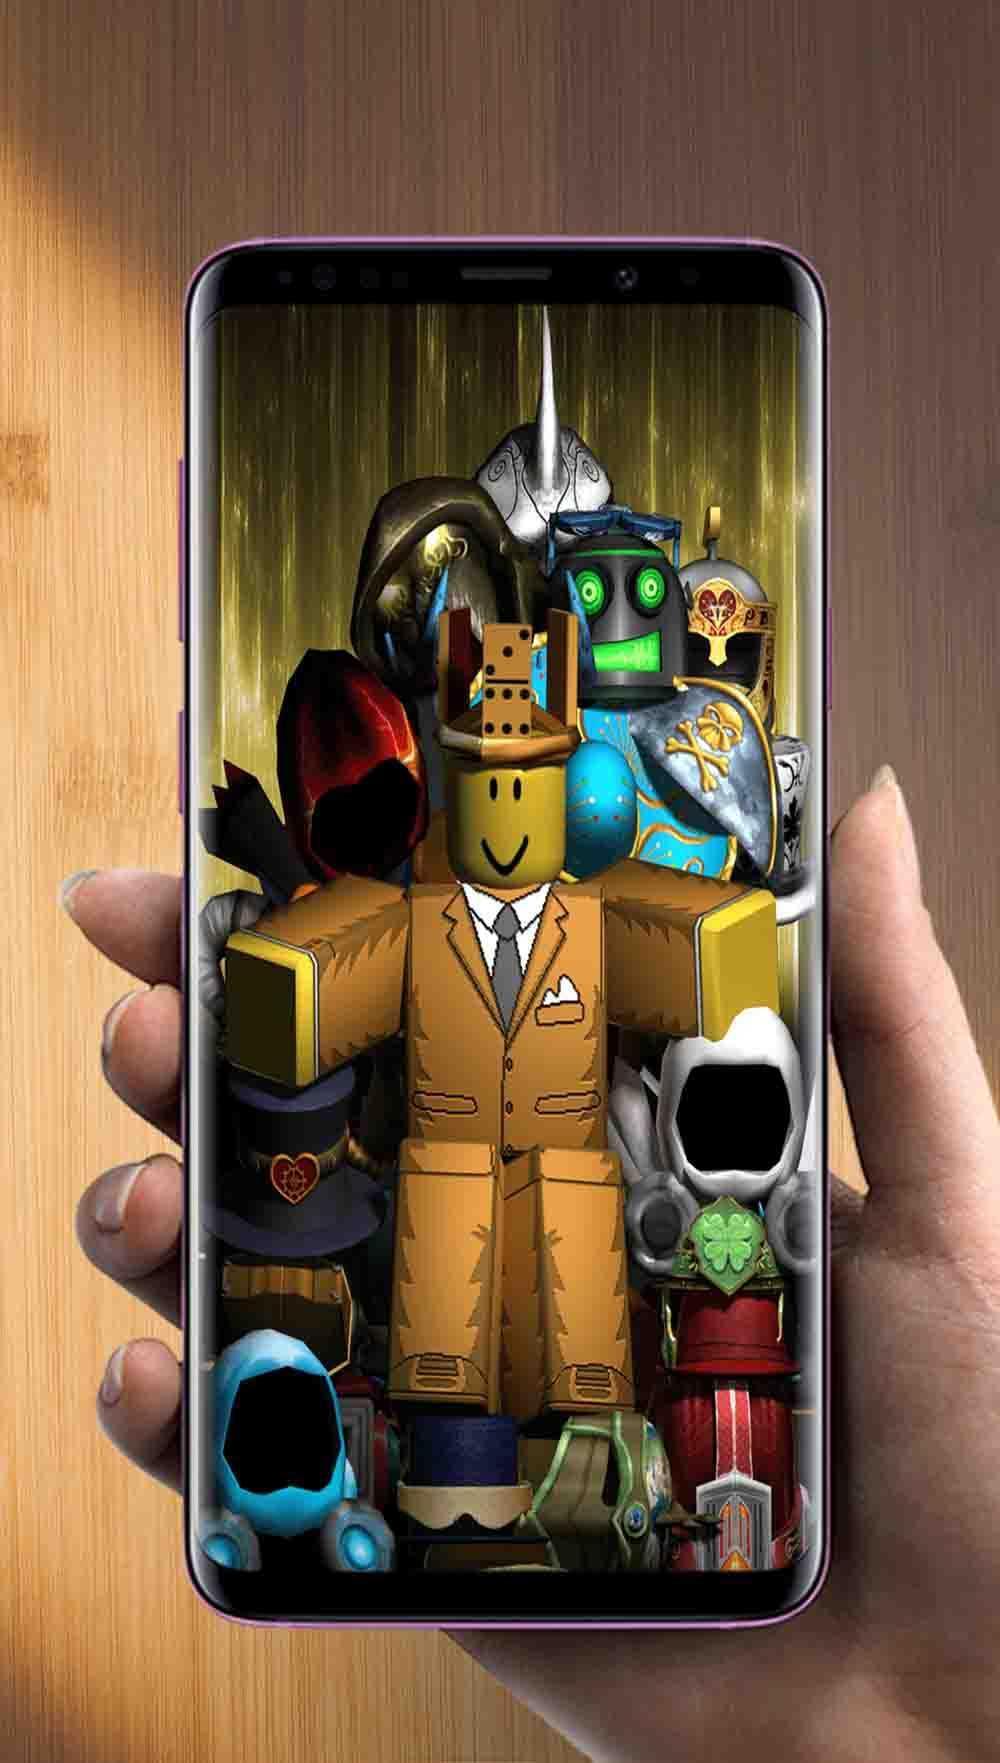 Roblox Phone Wallpapers